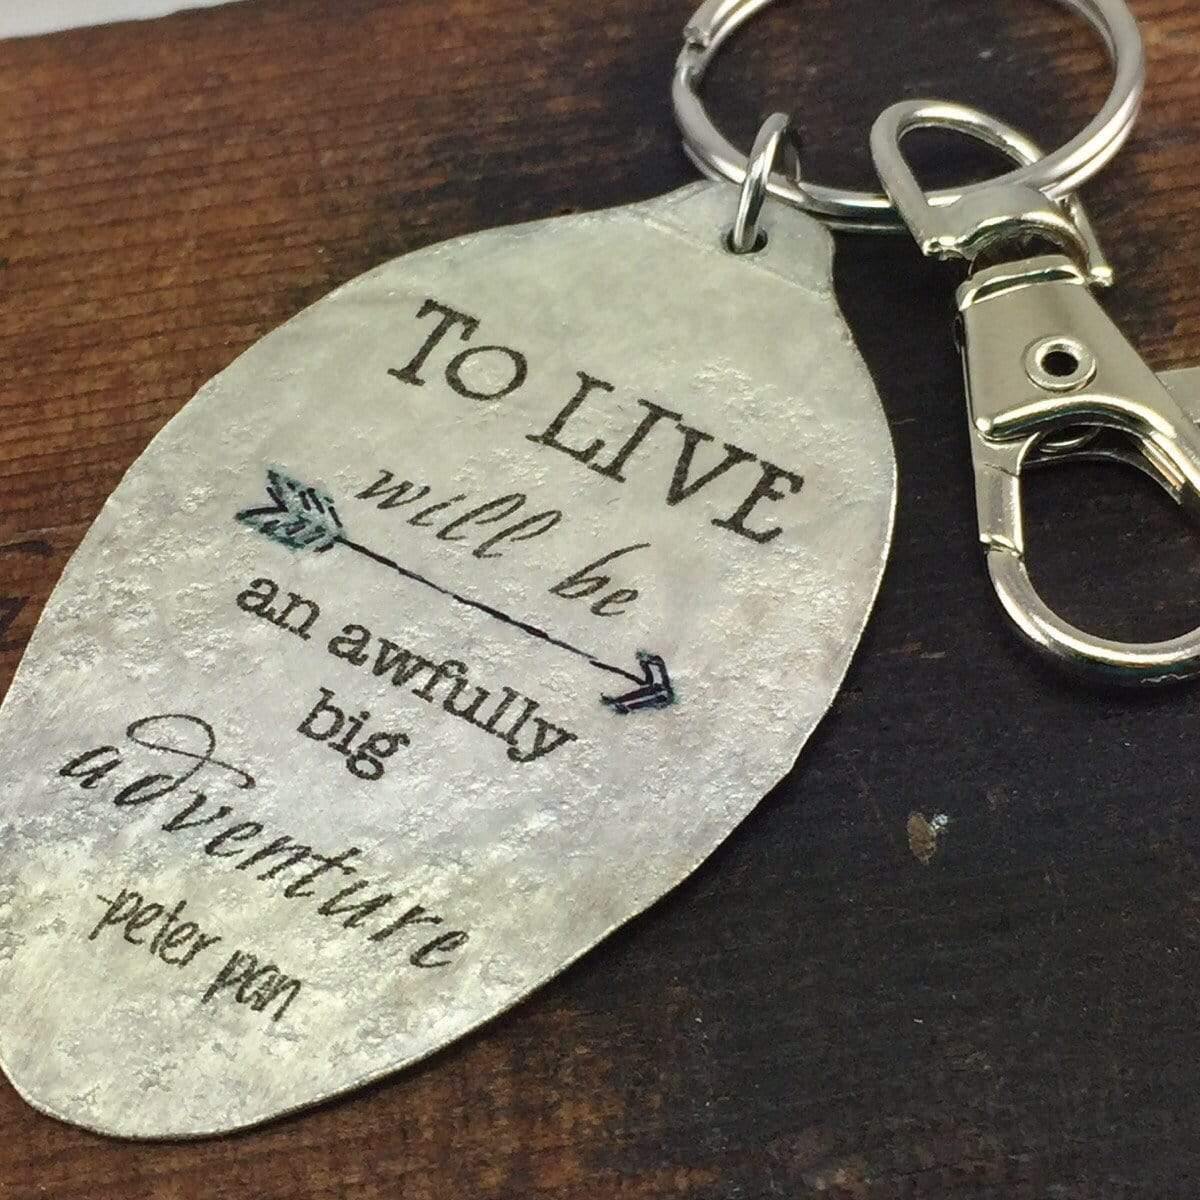 Peter Pan Quote Keychain made from a Vintage Silver Plate Teaspoon, To Live will be an Awfully big Adventure Inspiring Jewelry - KyleeMae Designs